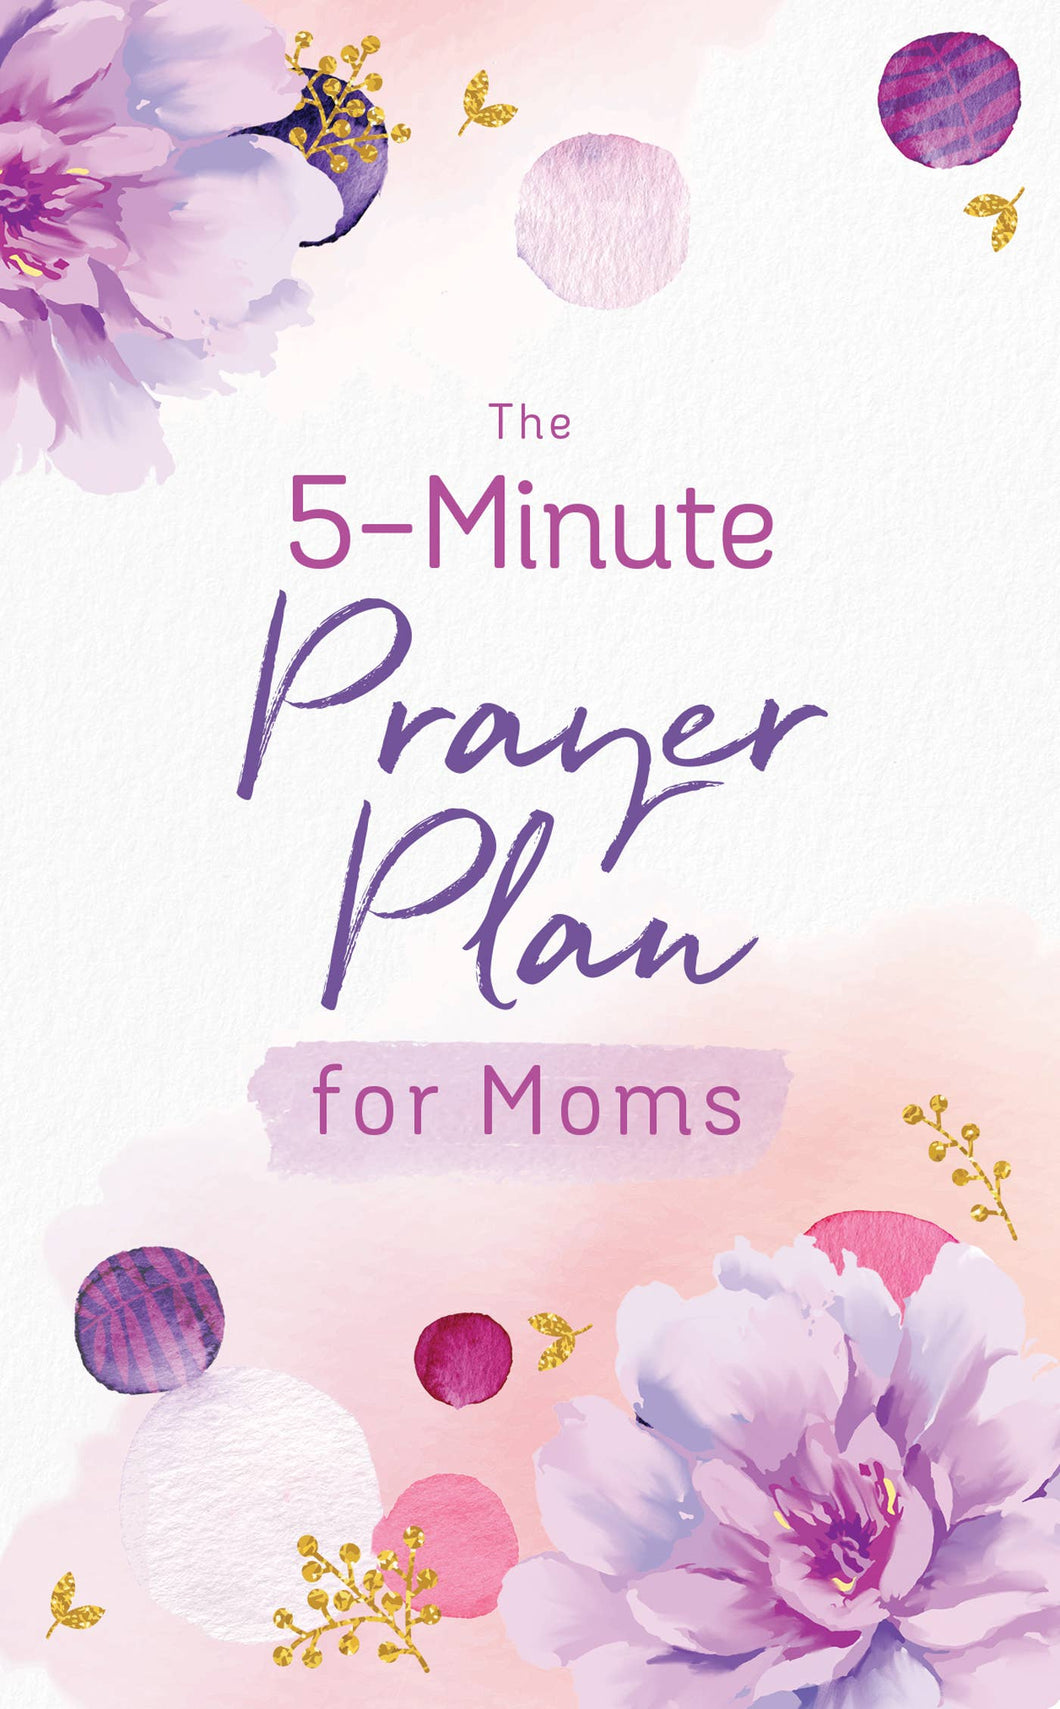 Book: The 5-Minute Prayer Plan for Moms